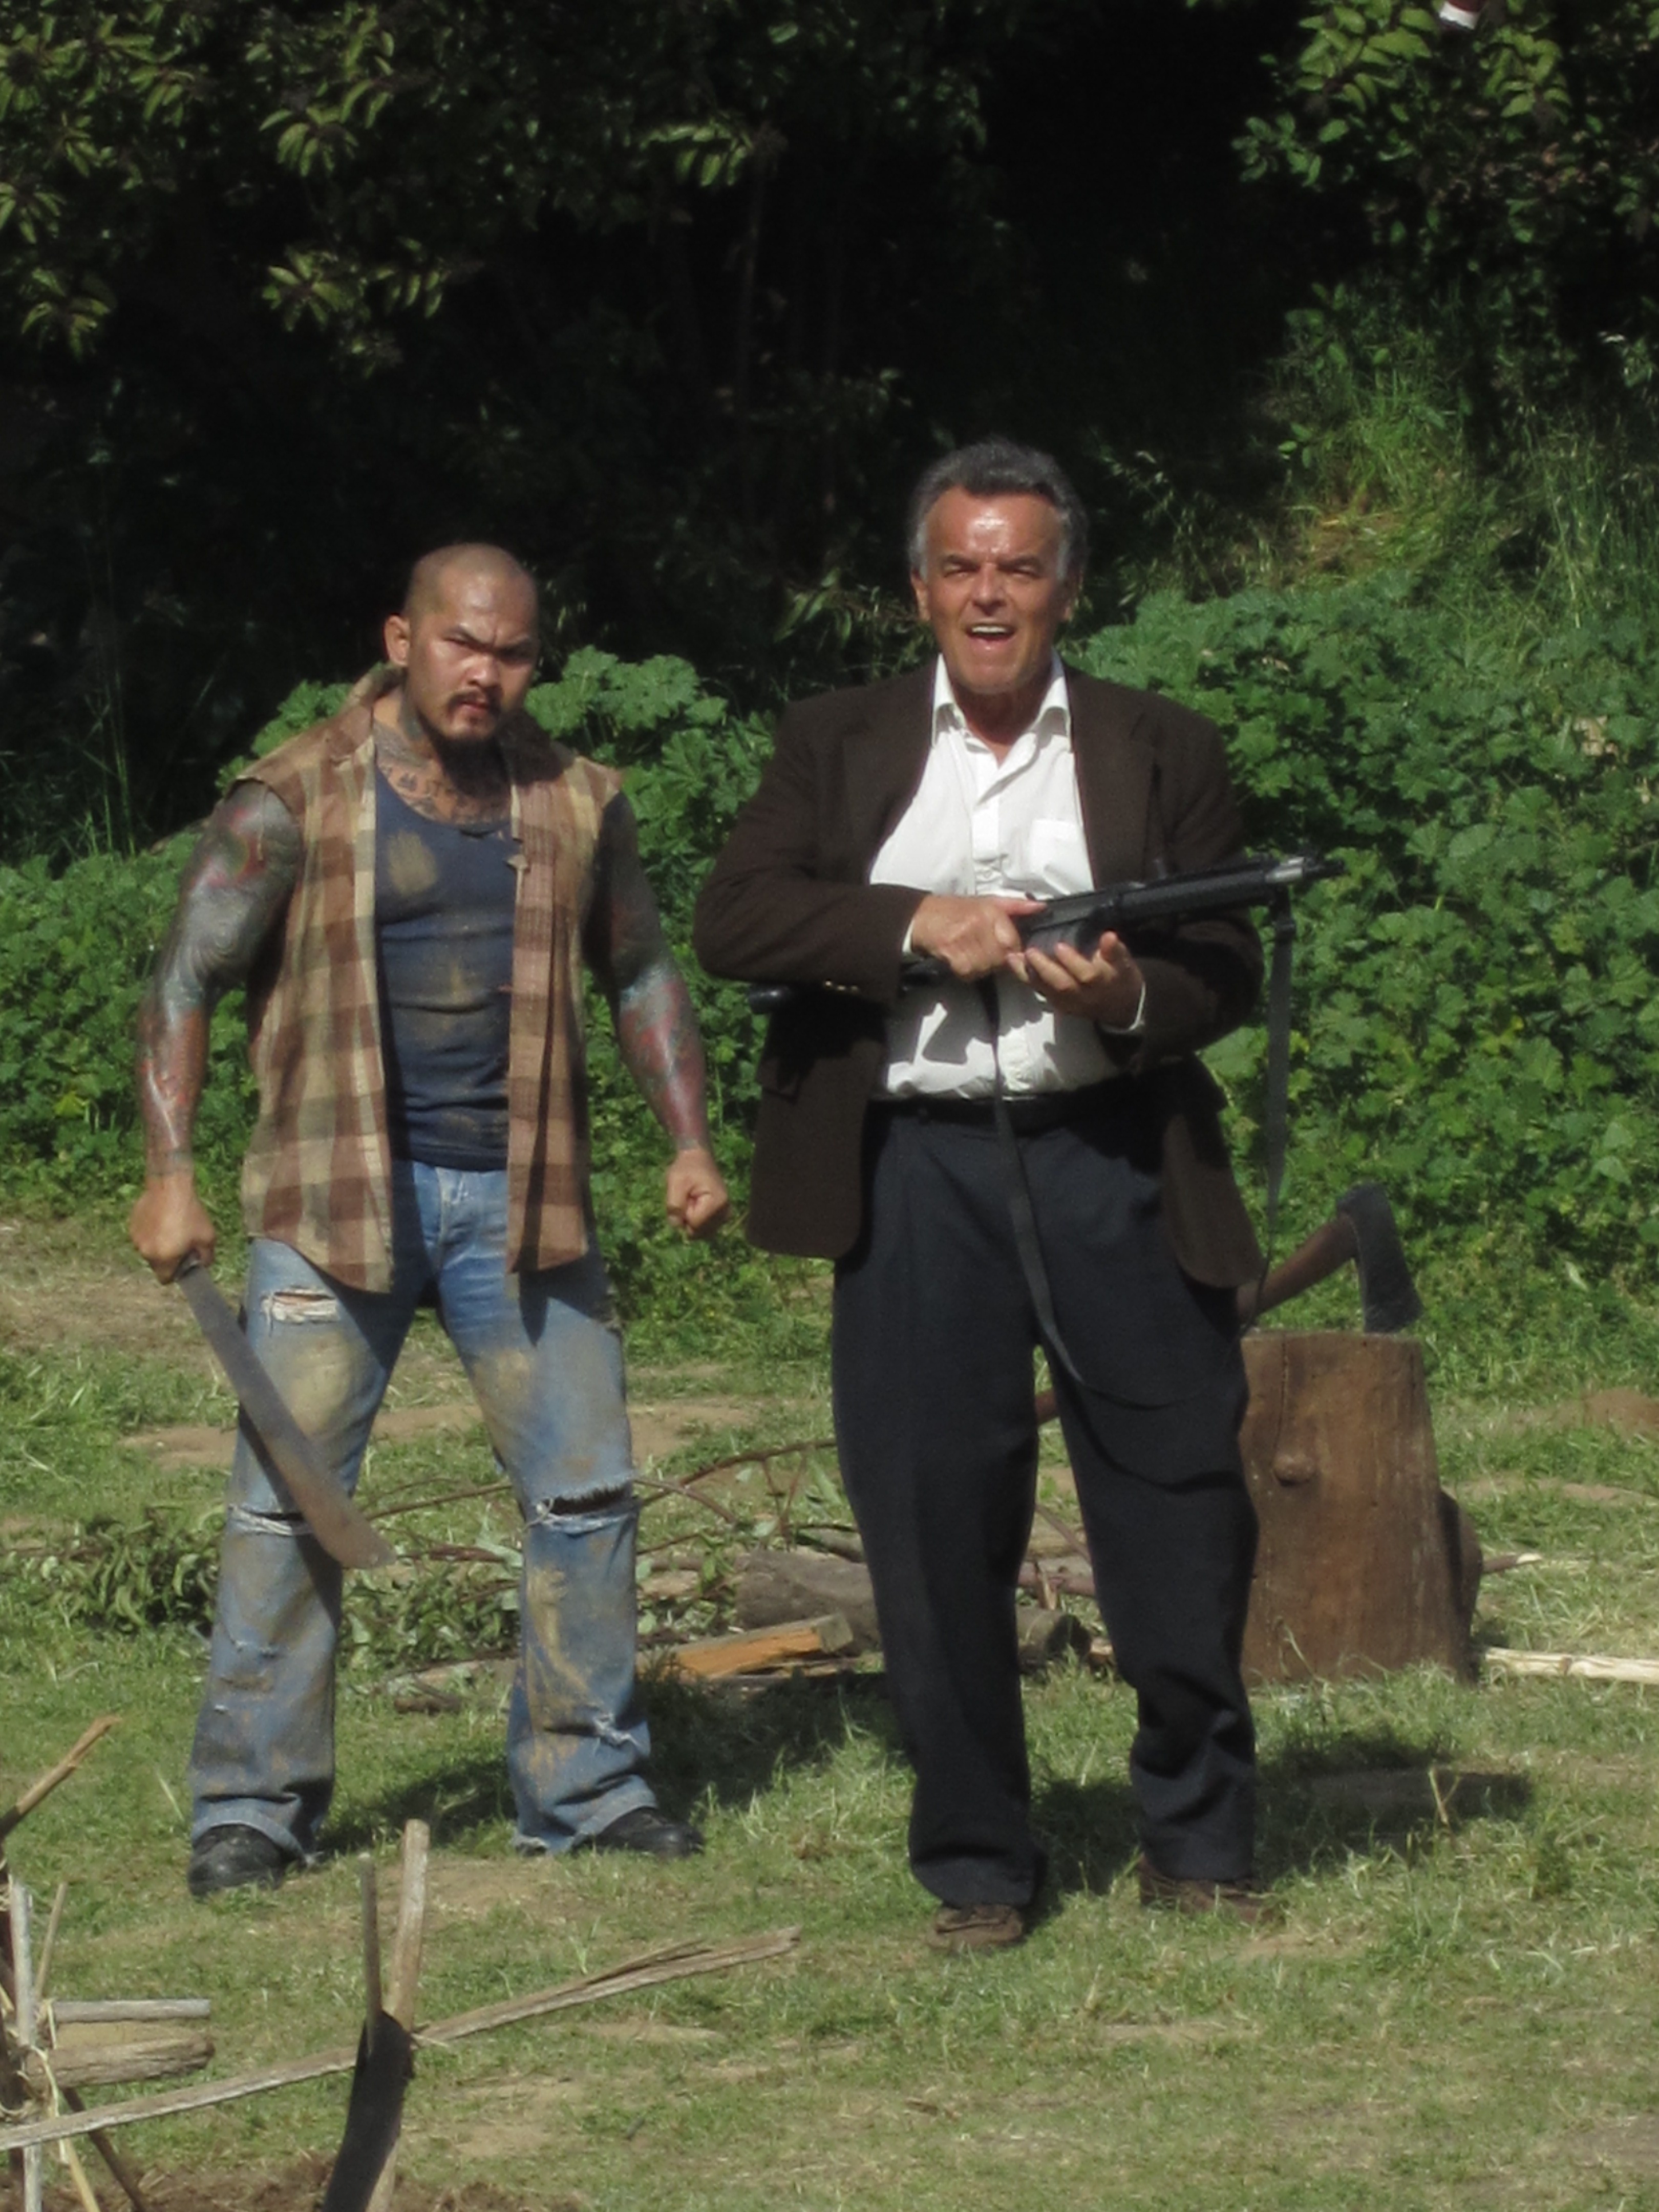 Marcus and Actor Ray Wise.